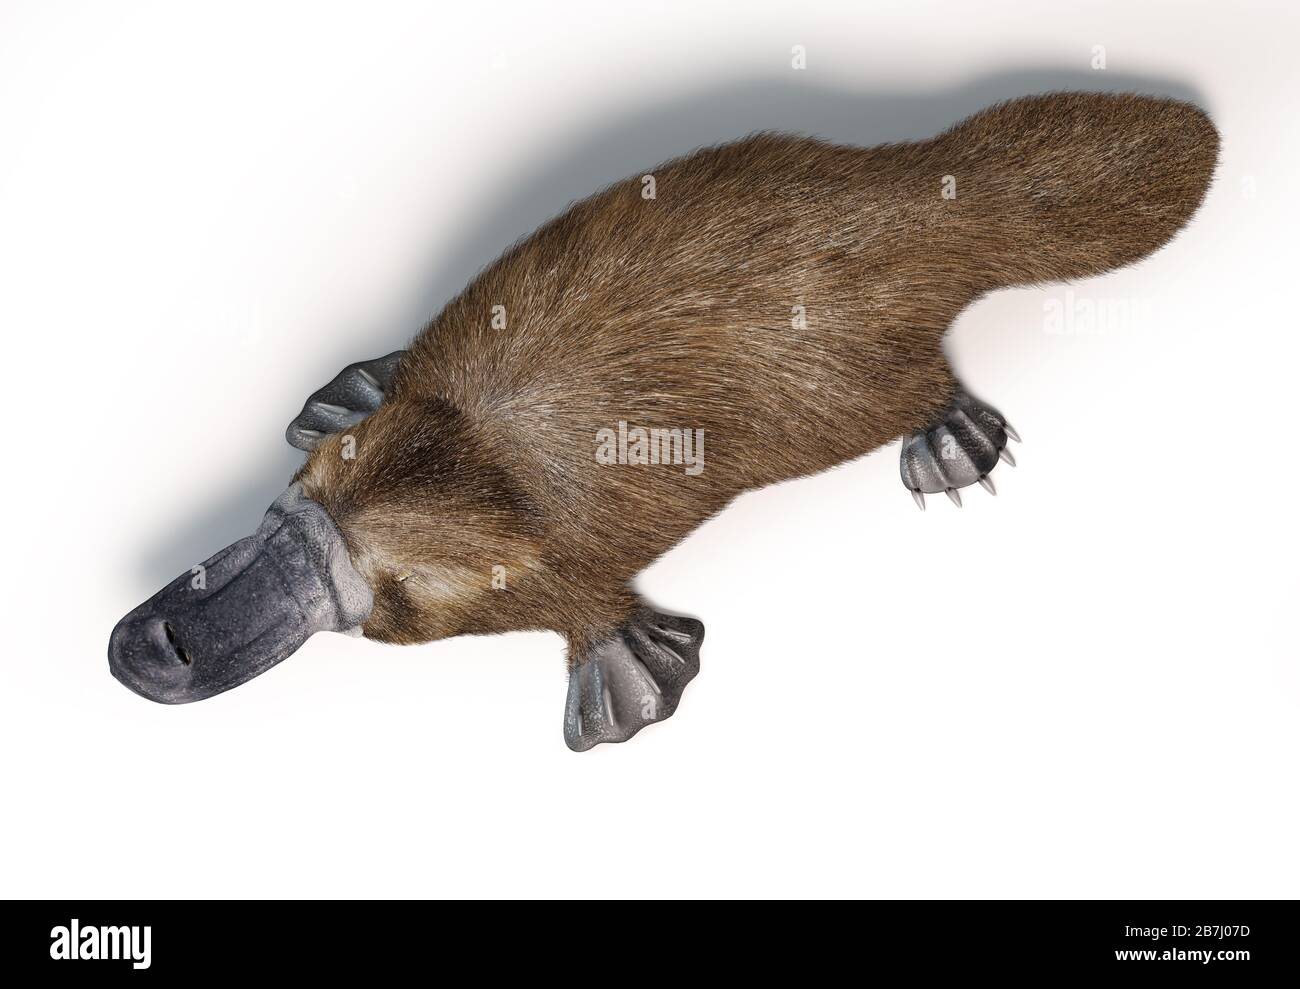 Semi-aquatic mammal, native in eastern Australia. Viewed from above On white background with drop shadow. Stock Photo